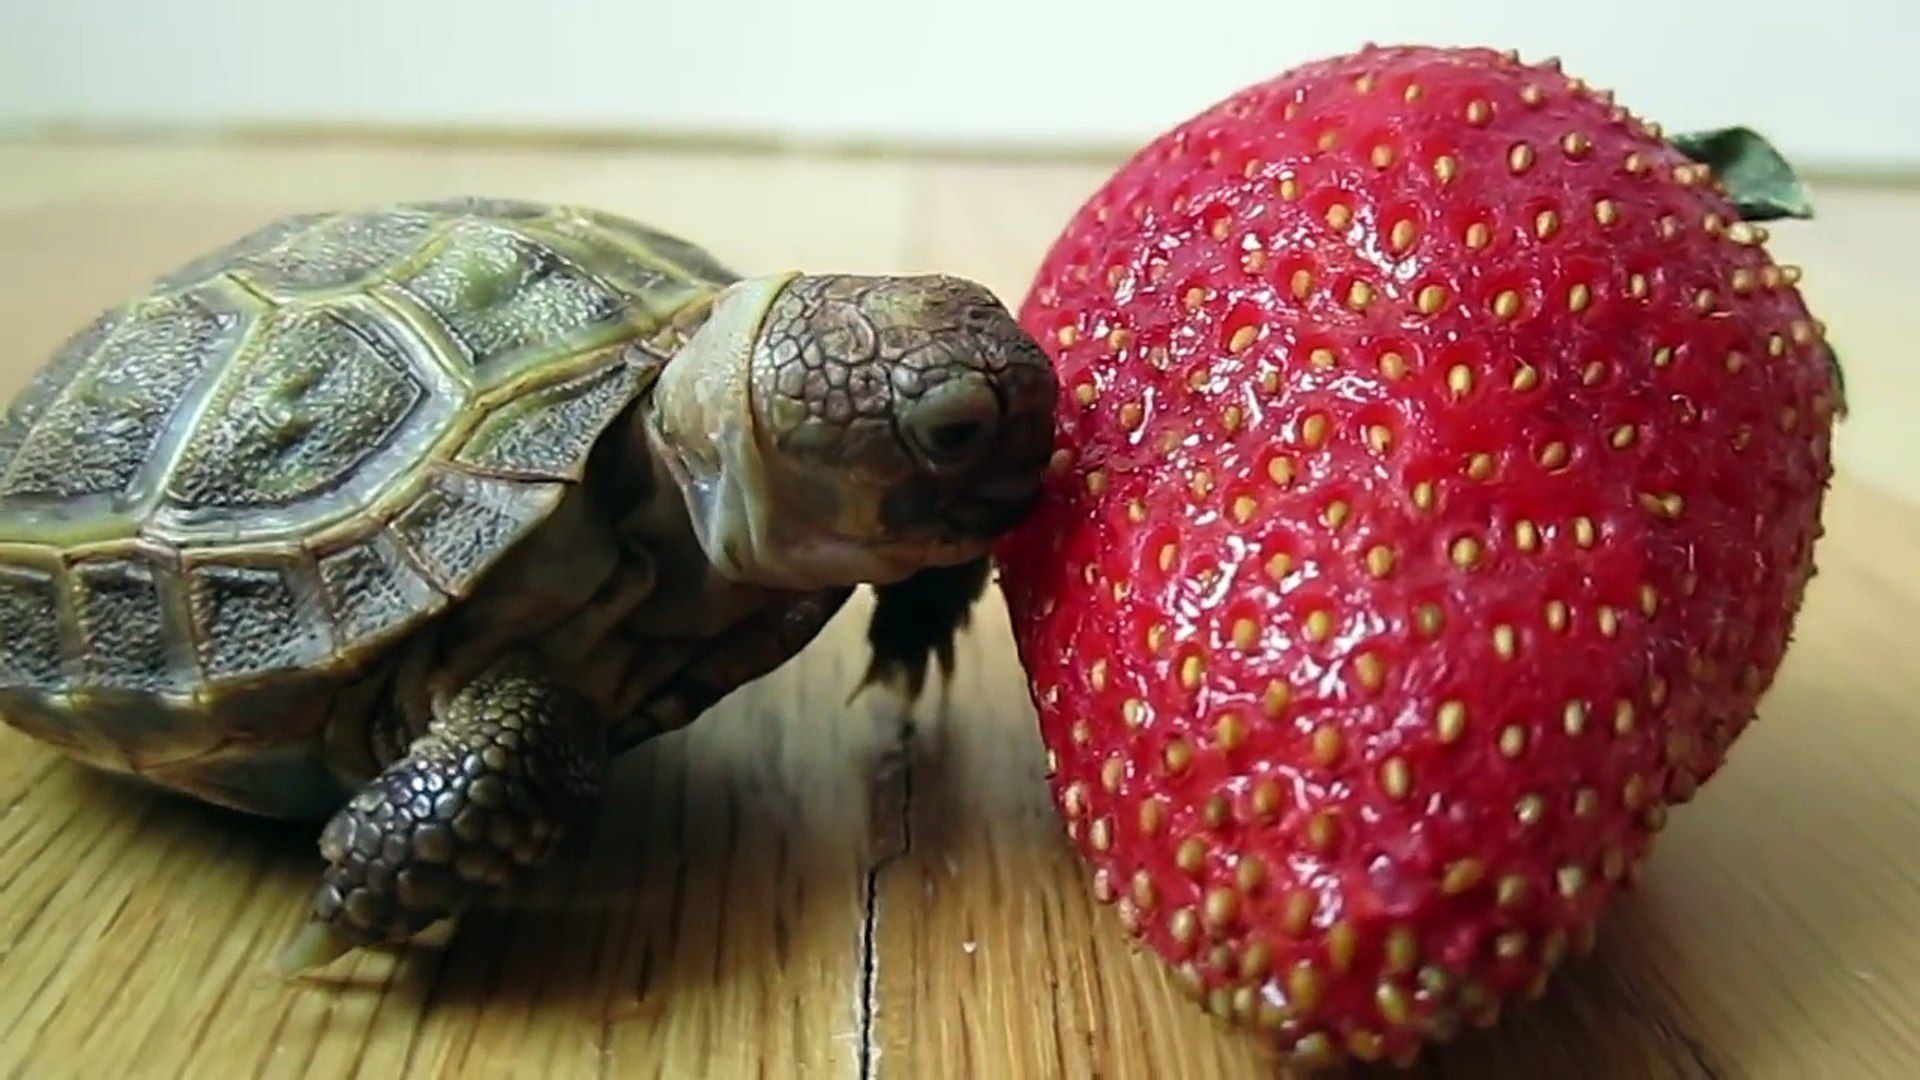 Turtle eating His First Strawberry